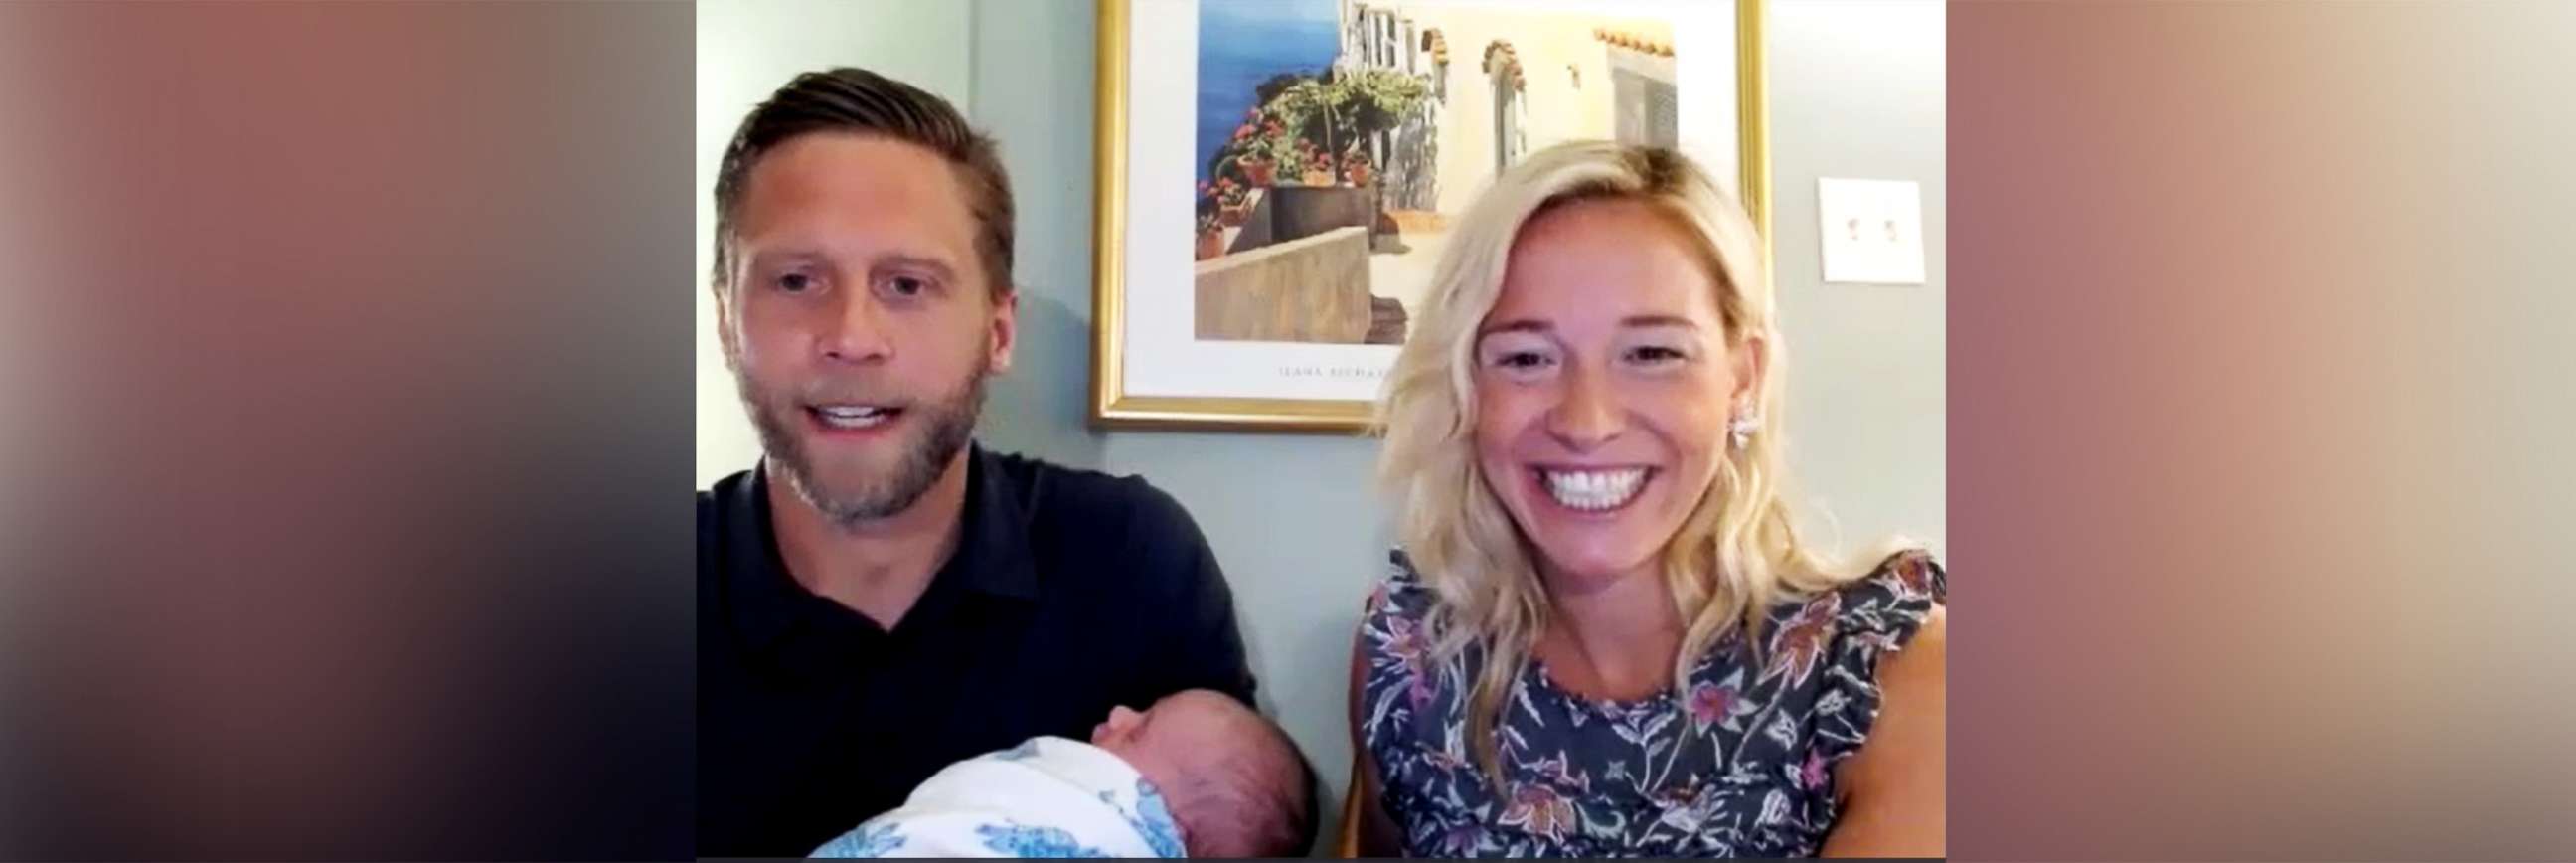 PHOTO: Christine and Patrick Balster, who welcomed their second child, Koller William Balster, on Aug. 4, are interviewed by Will Ganss of ABC News.